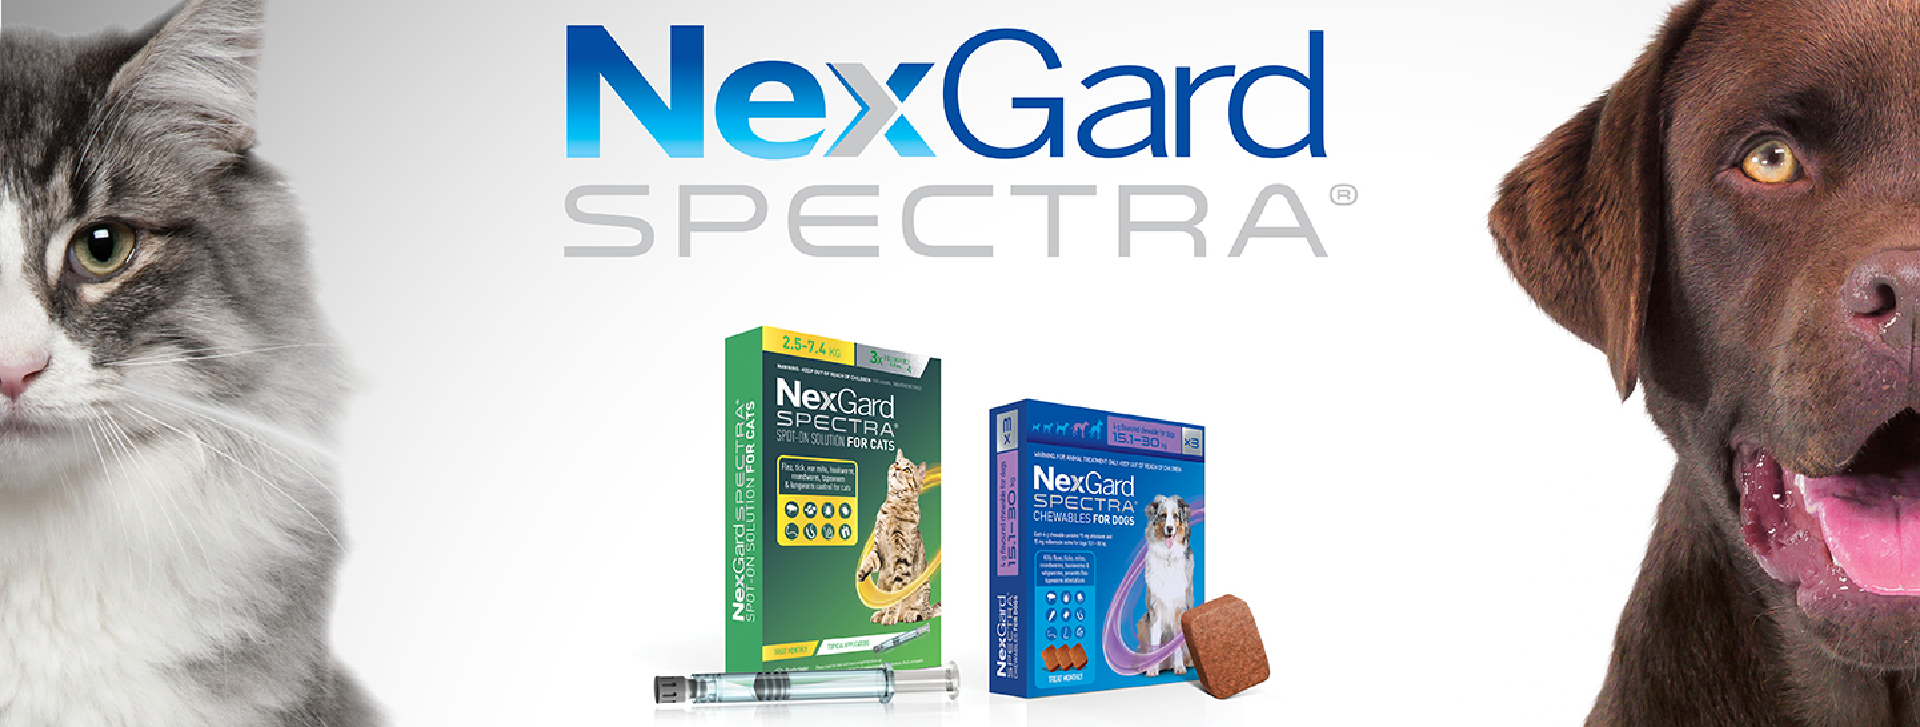 Nexgard flea, tick & worming protection for cats and dogs. 